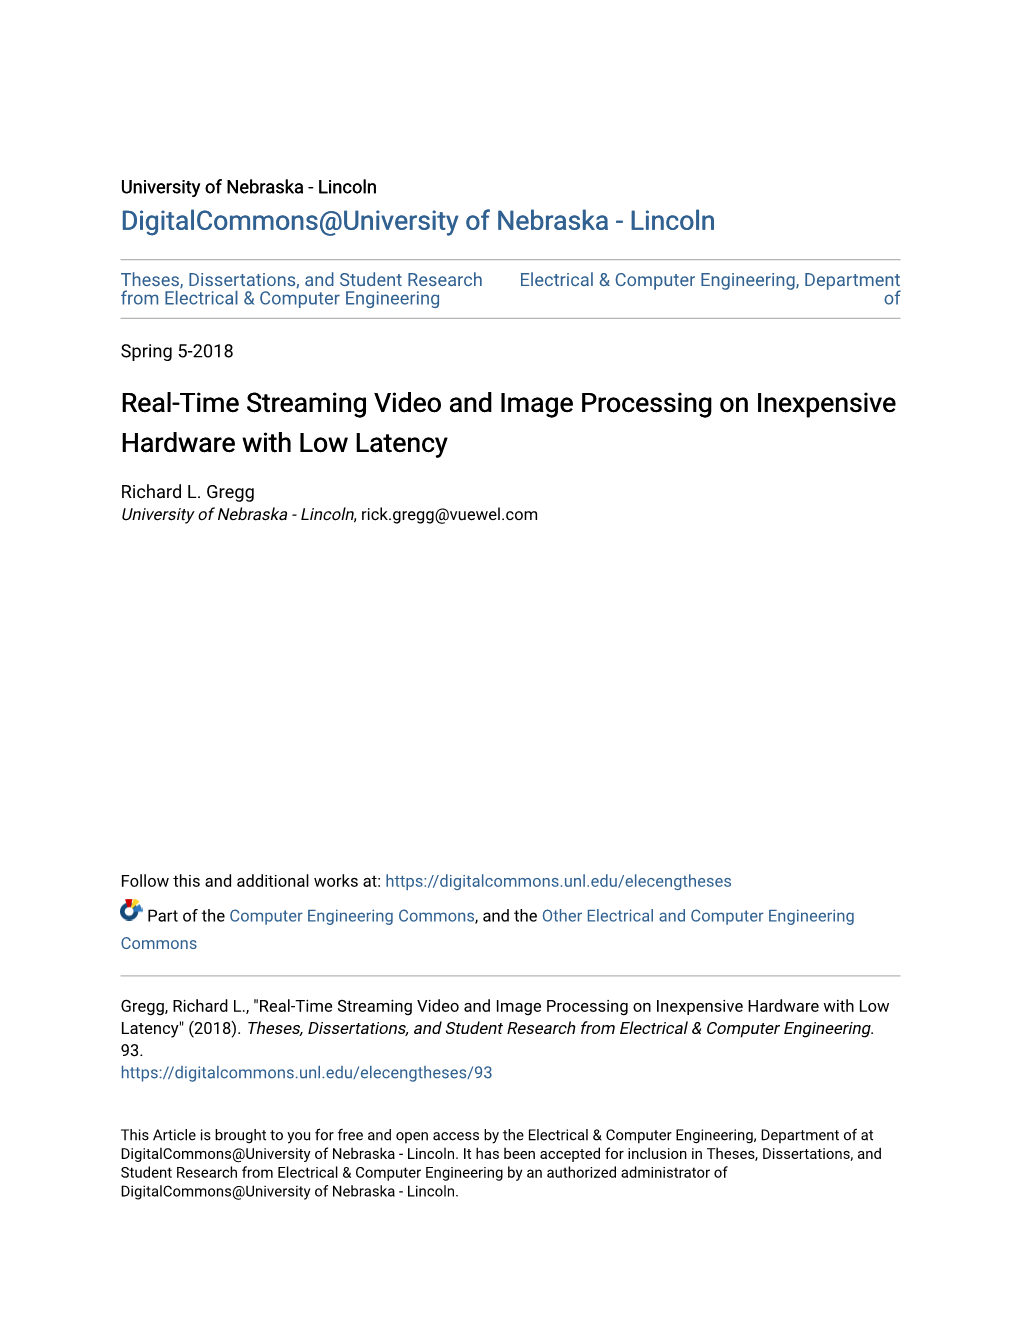 Real-Time Streaming Video and Image Processing on Inexpensive Hardware with Low Latency